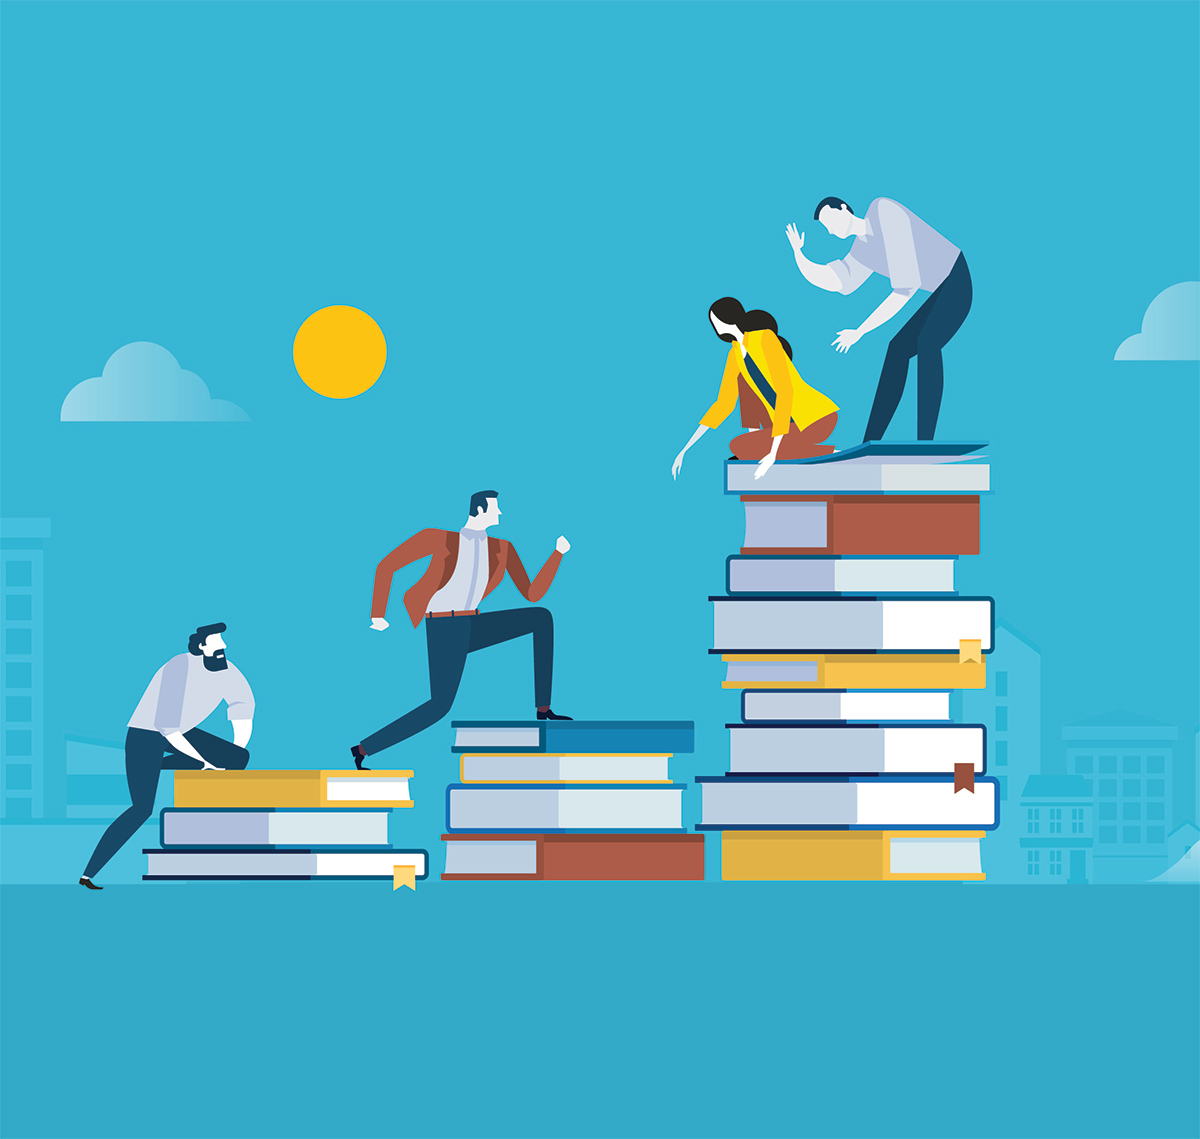 illustration of men and women climbing up stacks of books